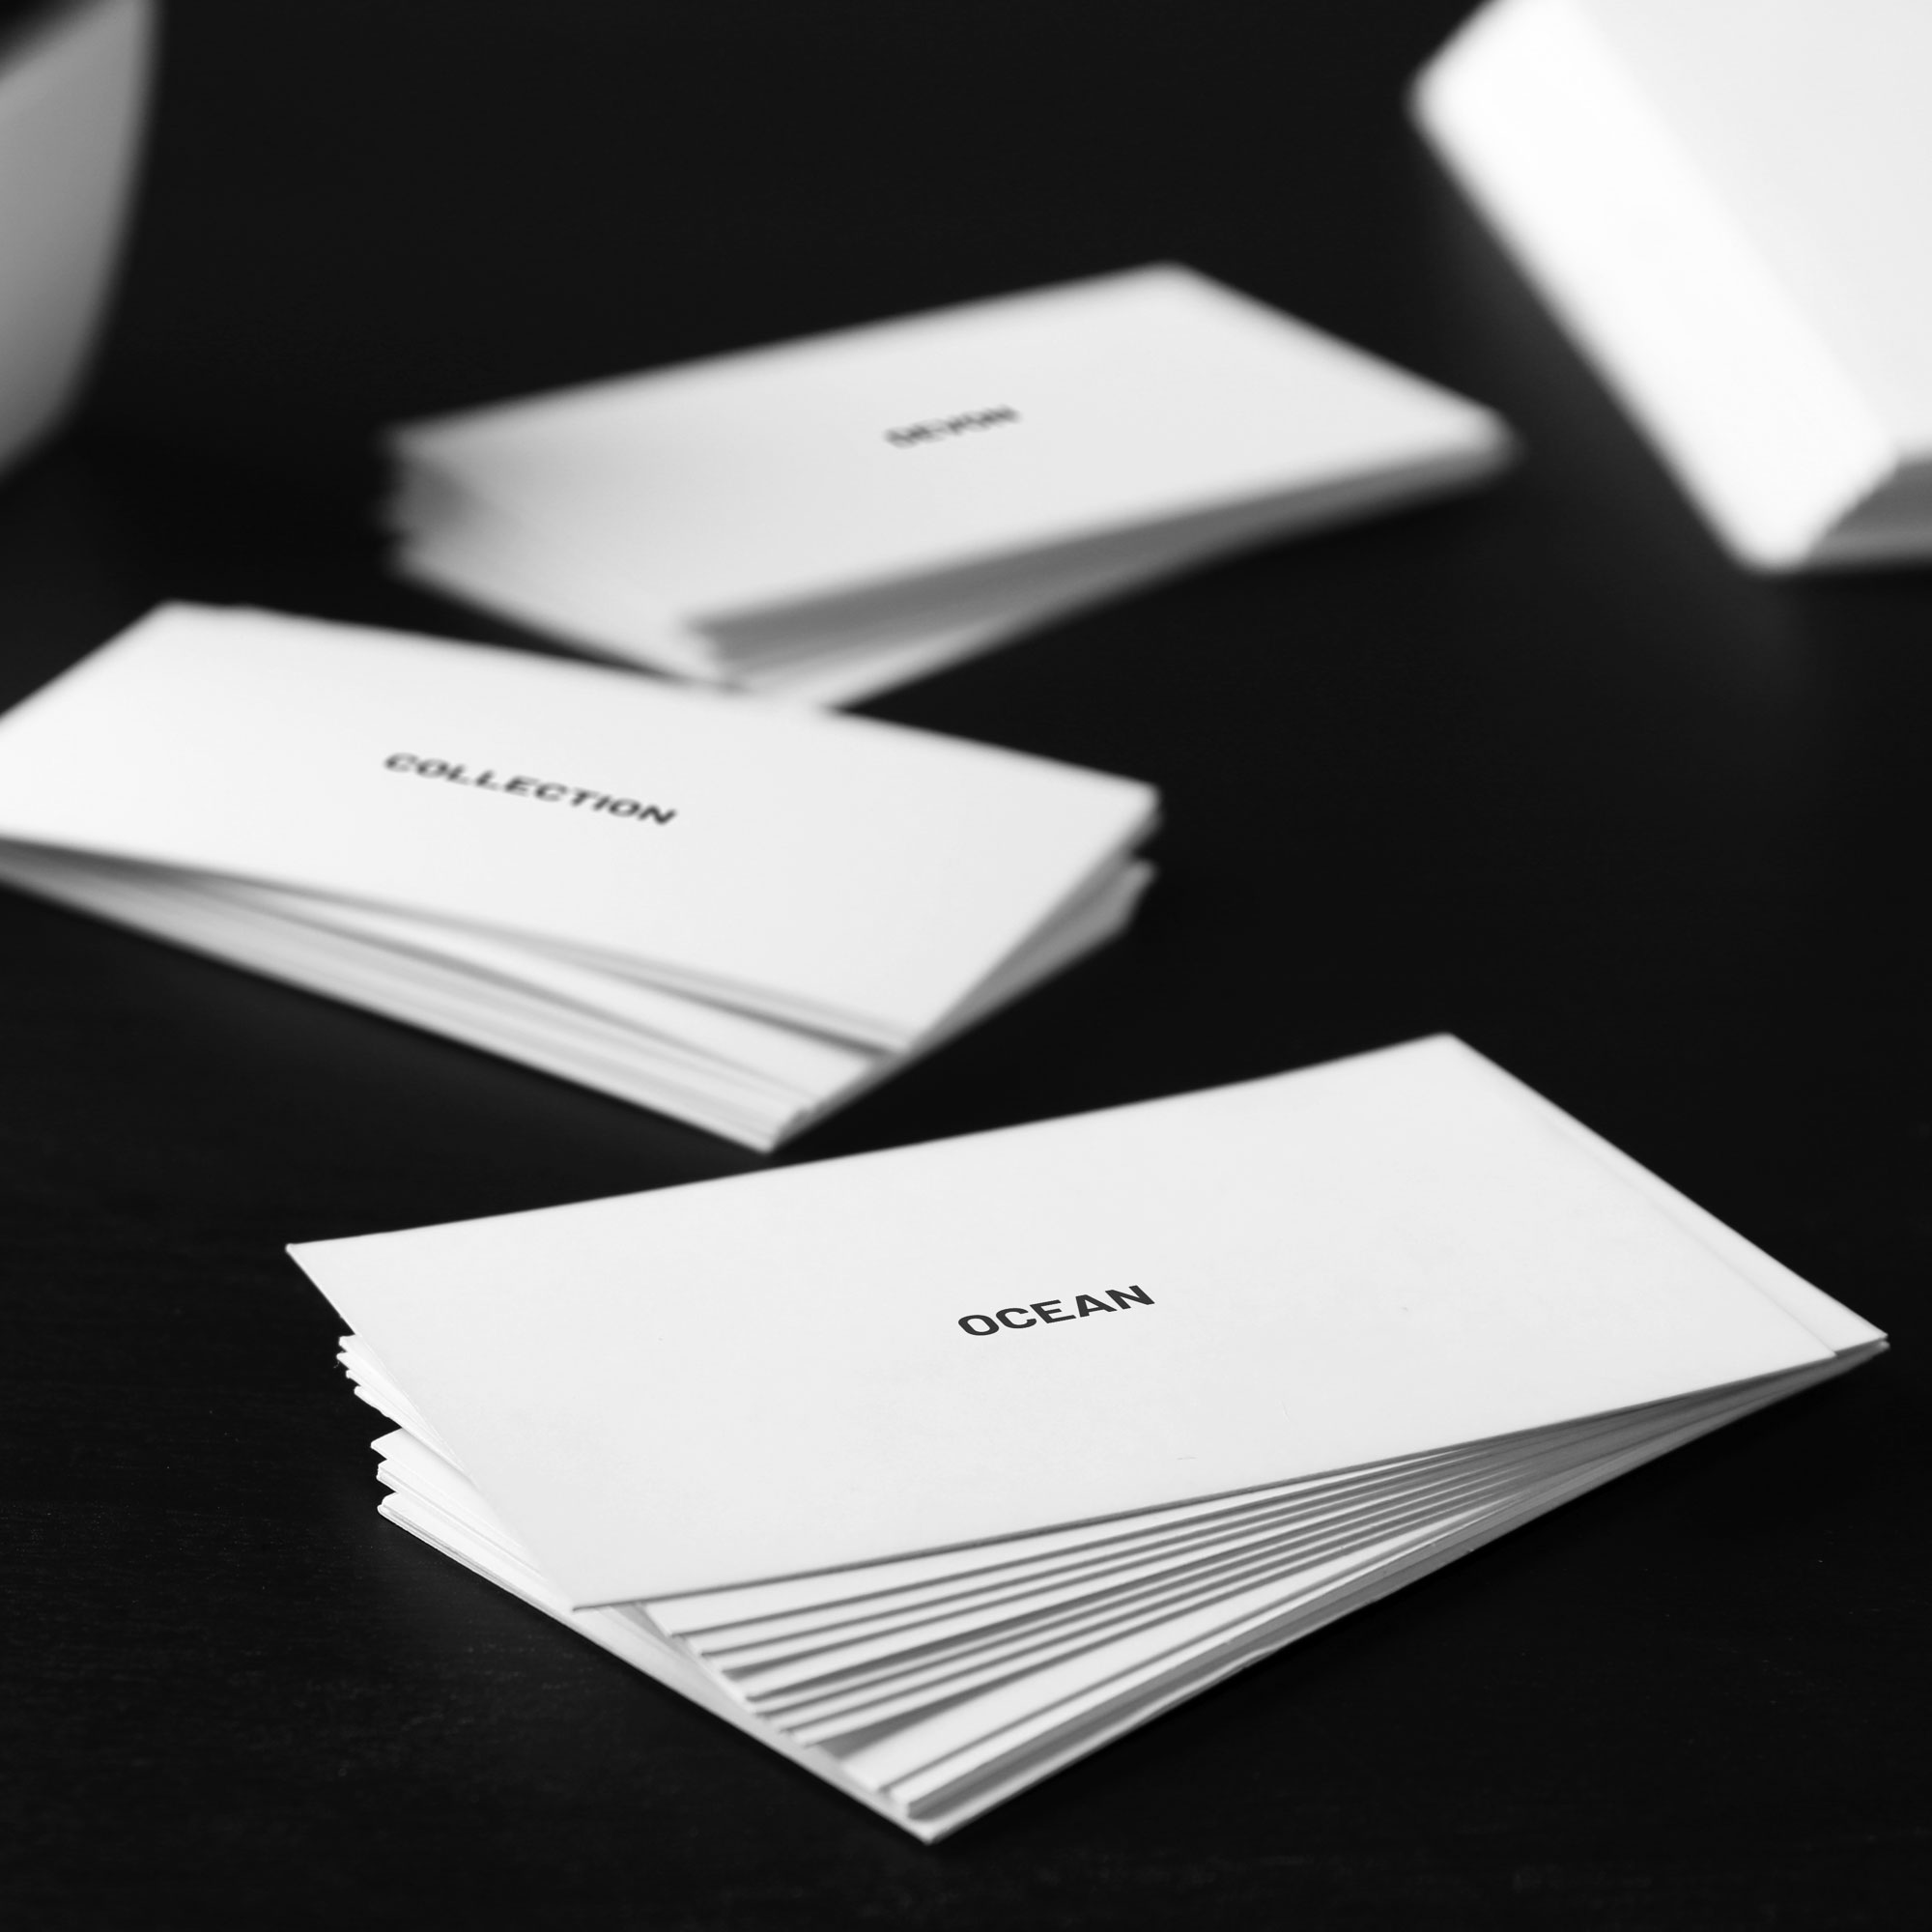 Logo and Branding Design and Evolution on business cards at Inventive